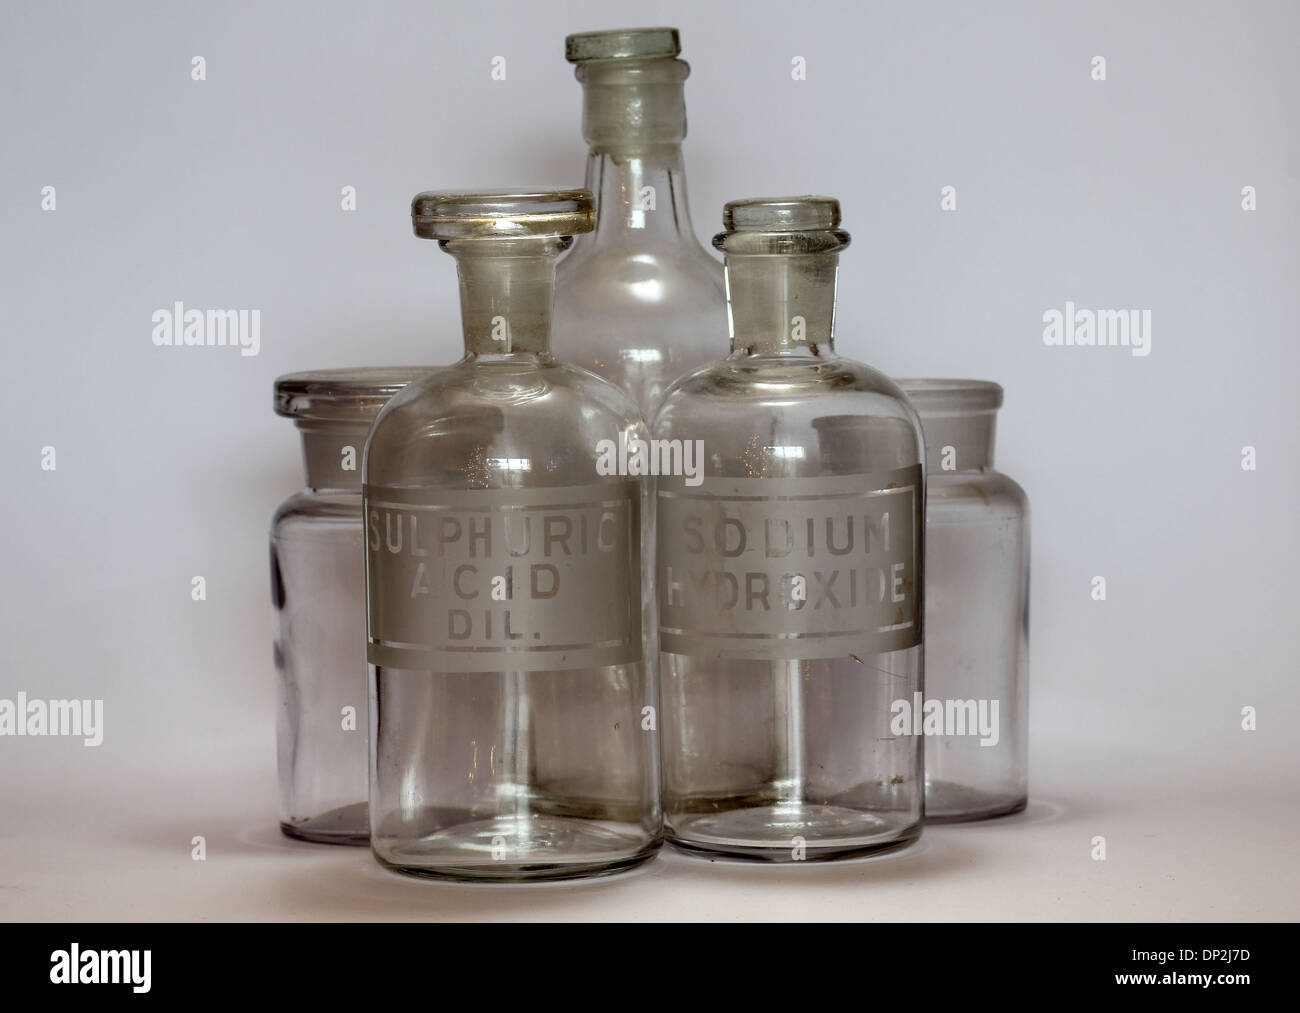 old chemistry bottle labeled for Sulphuric Acid Diluted and Sodium Hydroxide Stock Photo